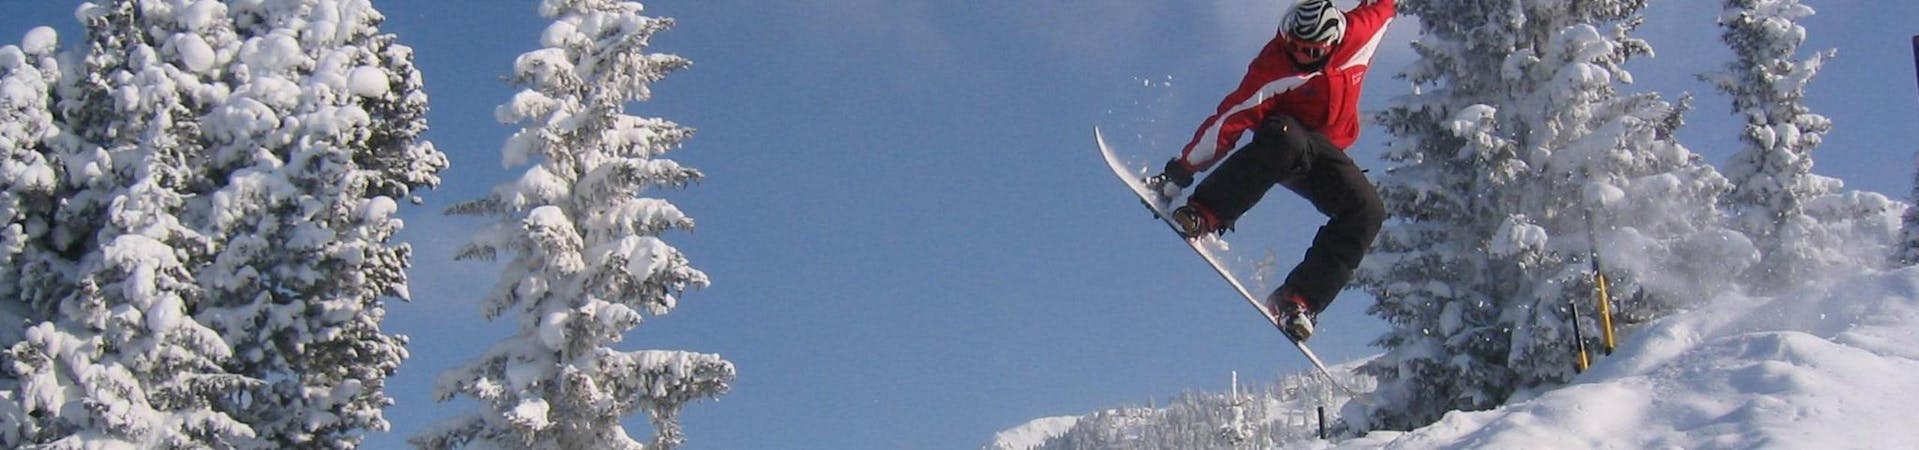 A snowboarder is showing off some impressive tricks during their Snowboarding Lessons for Adults - Intermediate with the ski school Skischule Lechner in Zell am Ziller.